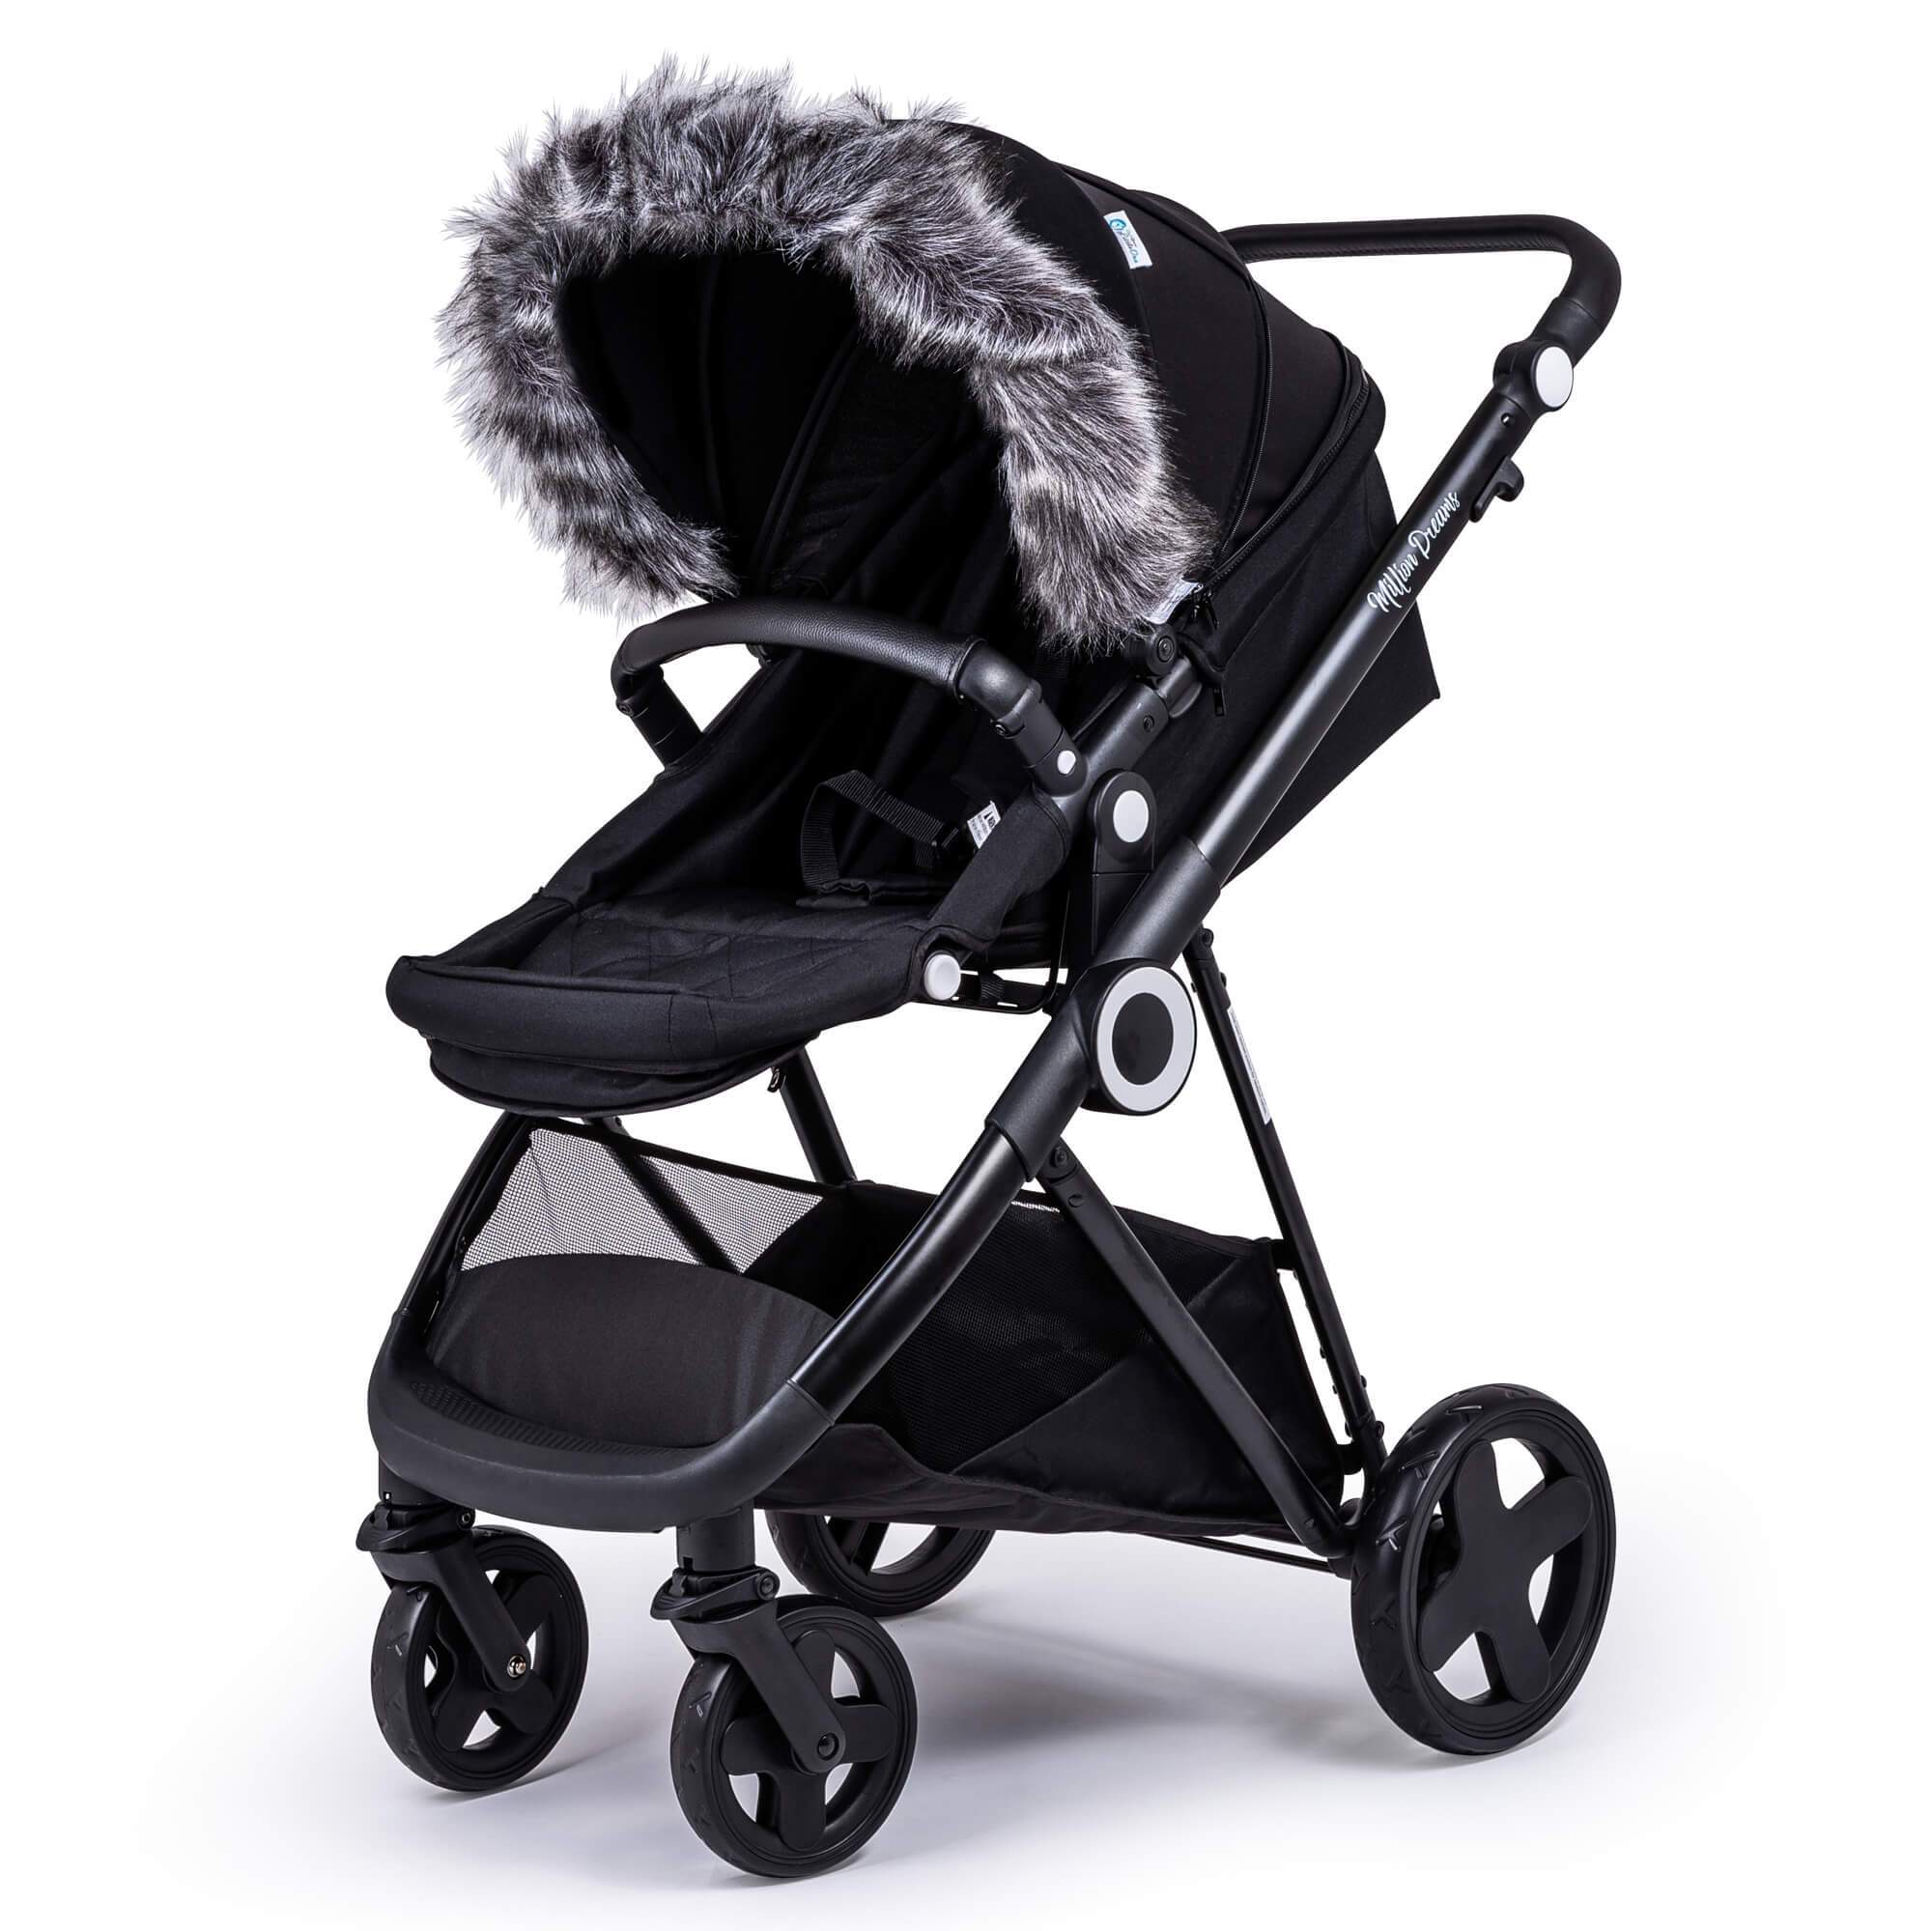 Pram Fur Hood Trim Attachment for Pushchair Compatible with Mima - Dark Grey / Fits All Models | For Your Little One